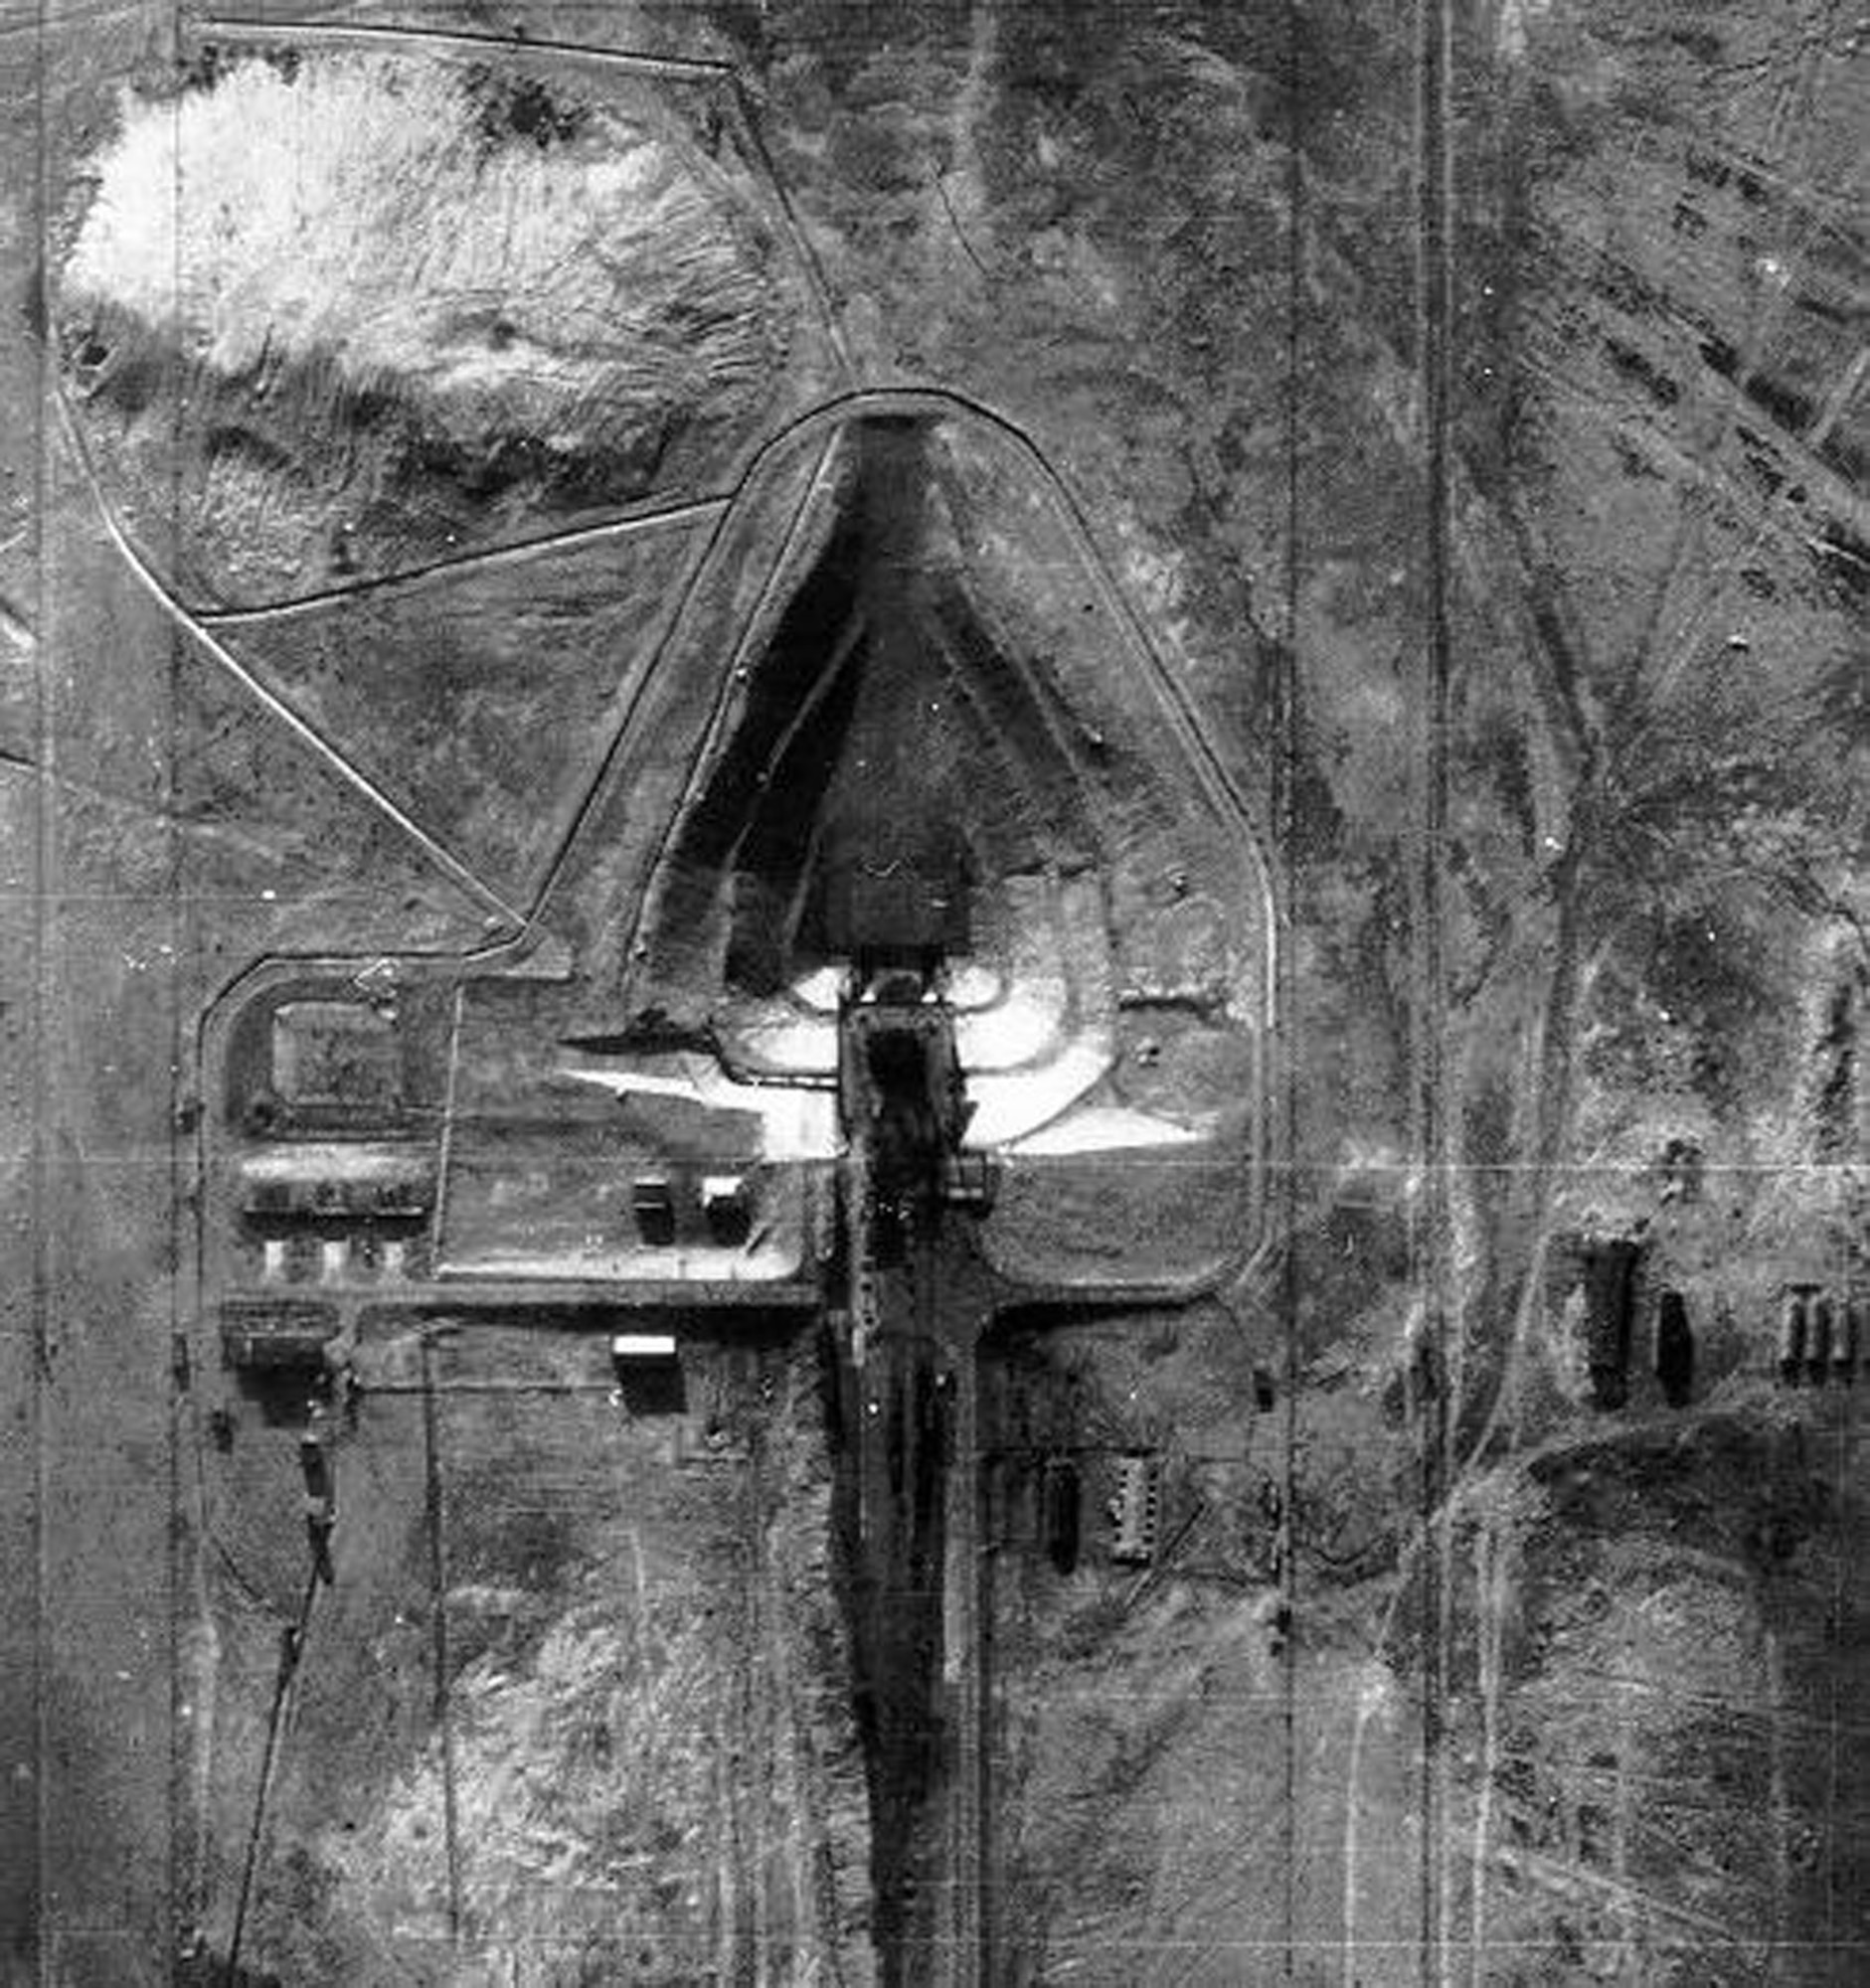 The Tyuratam SS-6 missile site in the central USSR, photographed by an early U-2 mission. (U.S. Air Force photo)